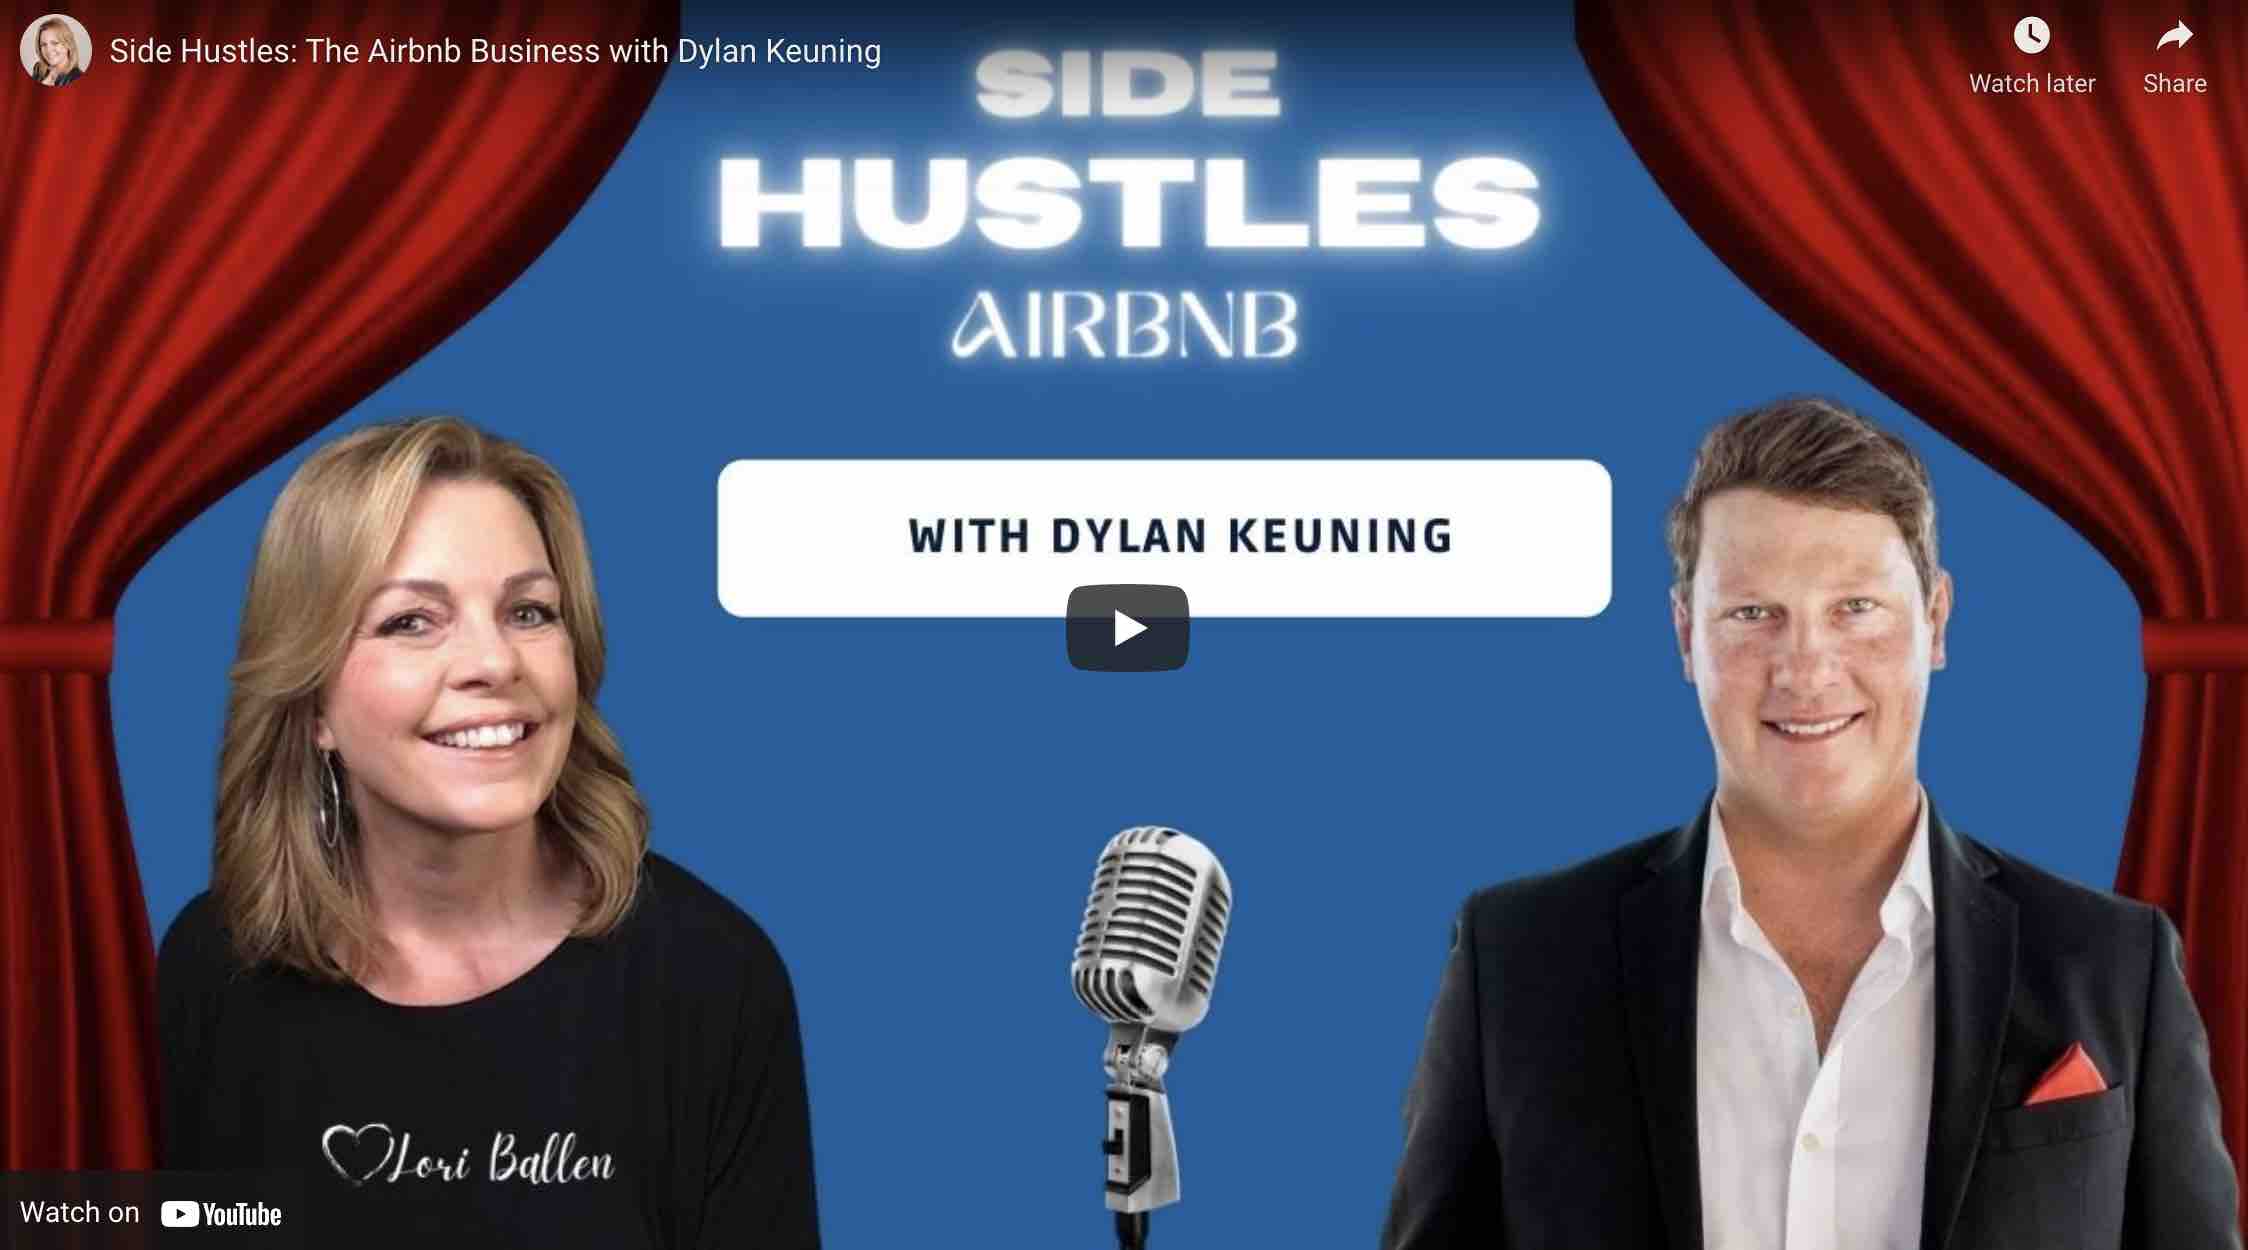 airbnb success interview with Dylan Keuning. The airbnb side hustle.